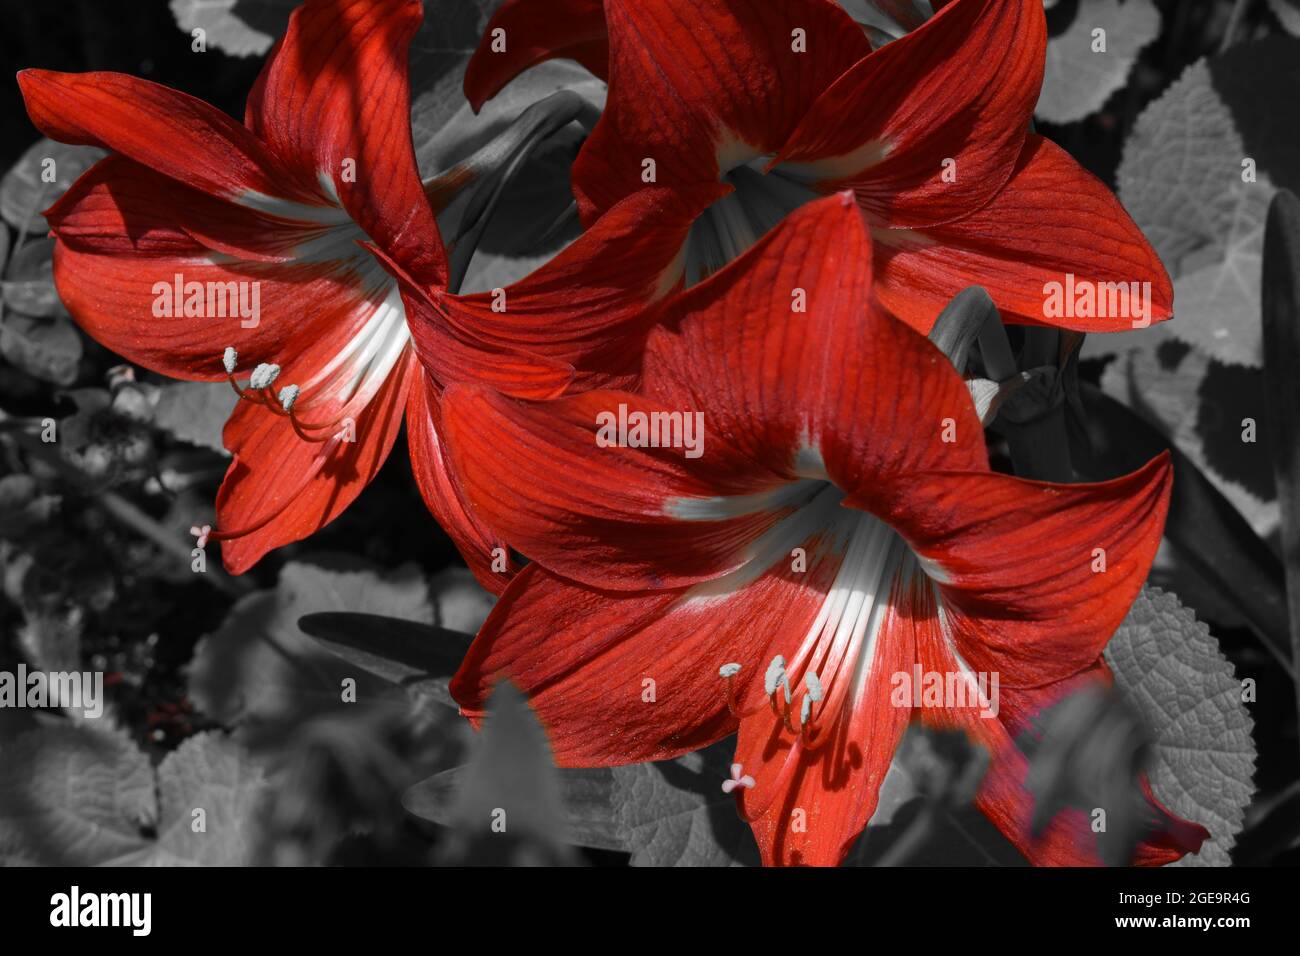 Red Amaryllis Lilies isolated against grey background. Stock Photo